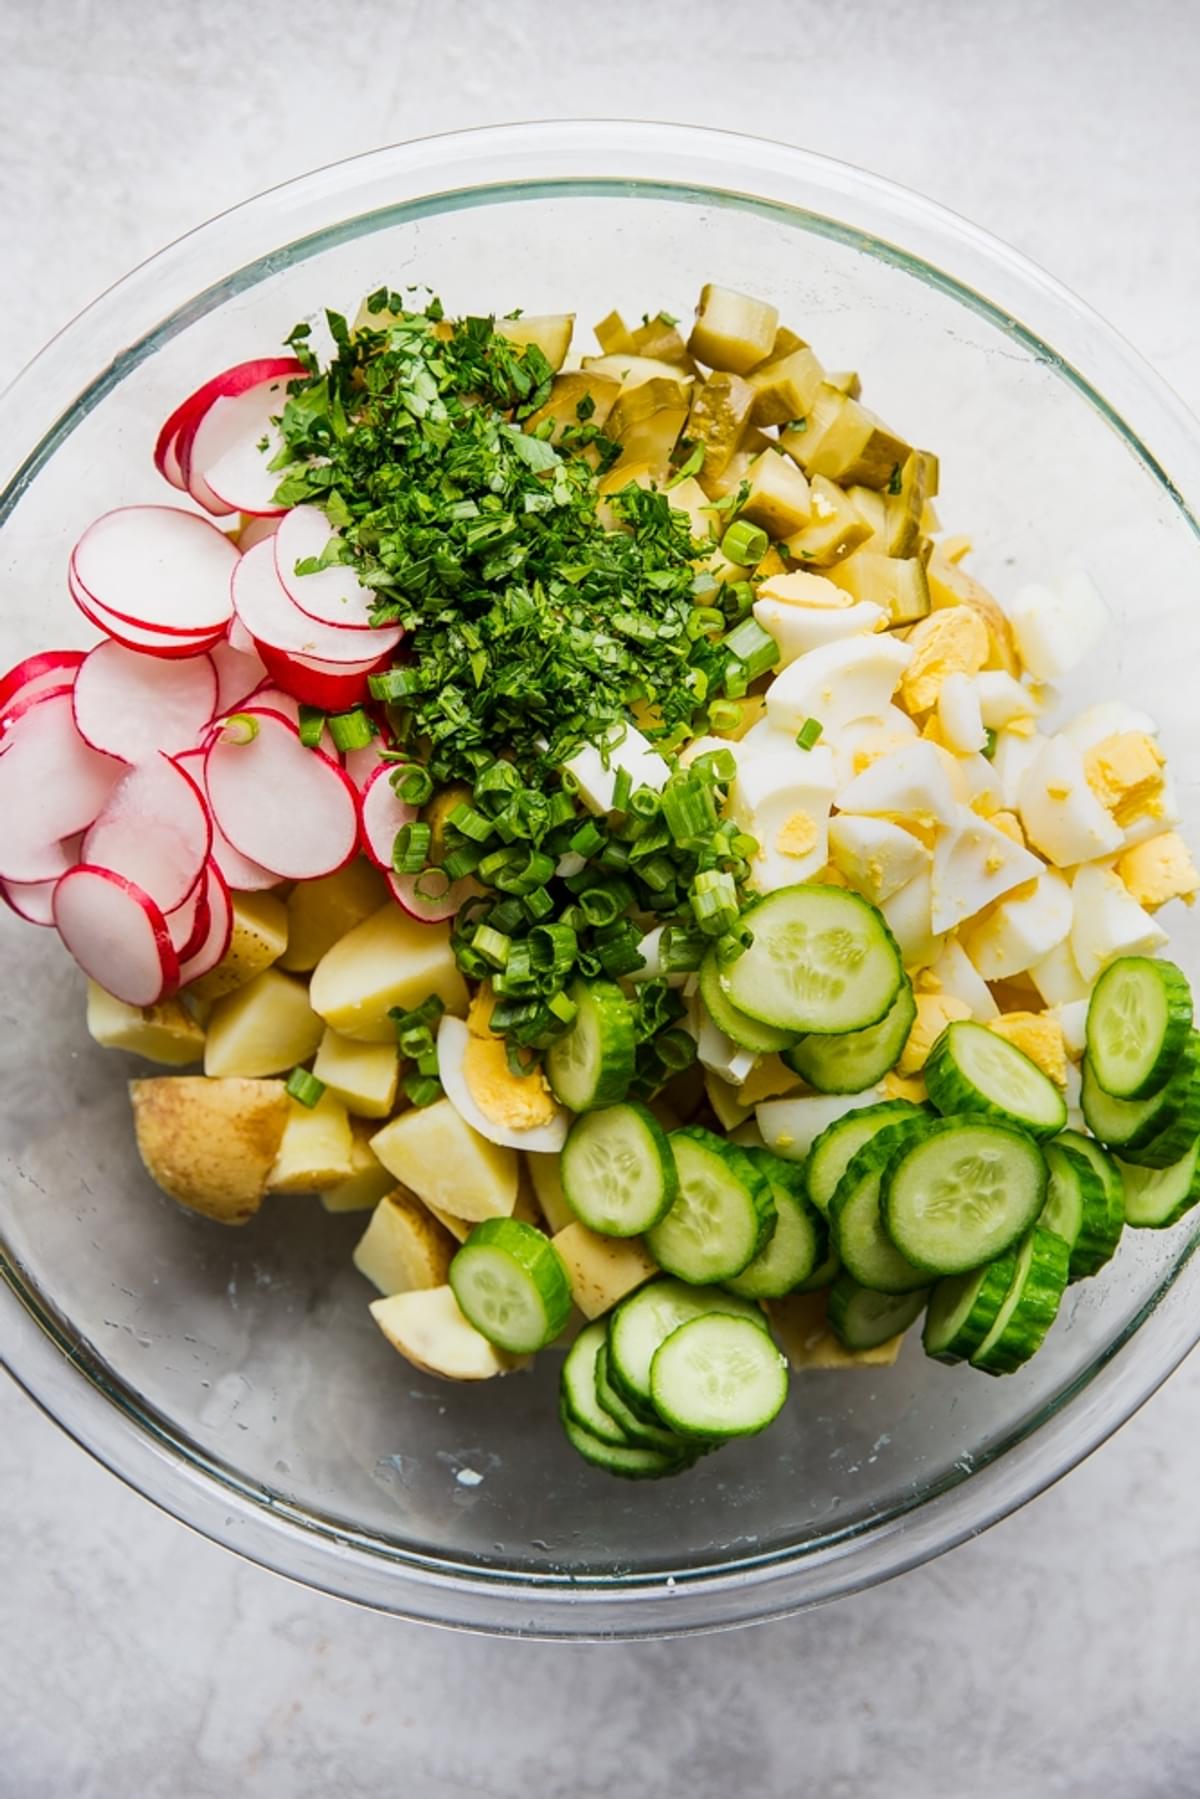 Ingredients in a bowl for potato salad hard boiled eggs, cucumbers, pickles, radishes olive oil vinegar mayonnaise